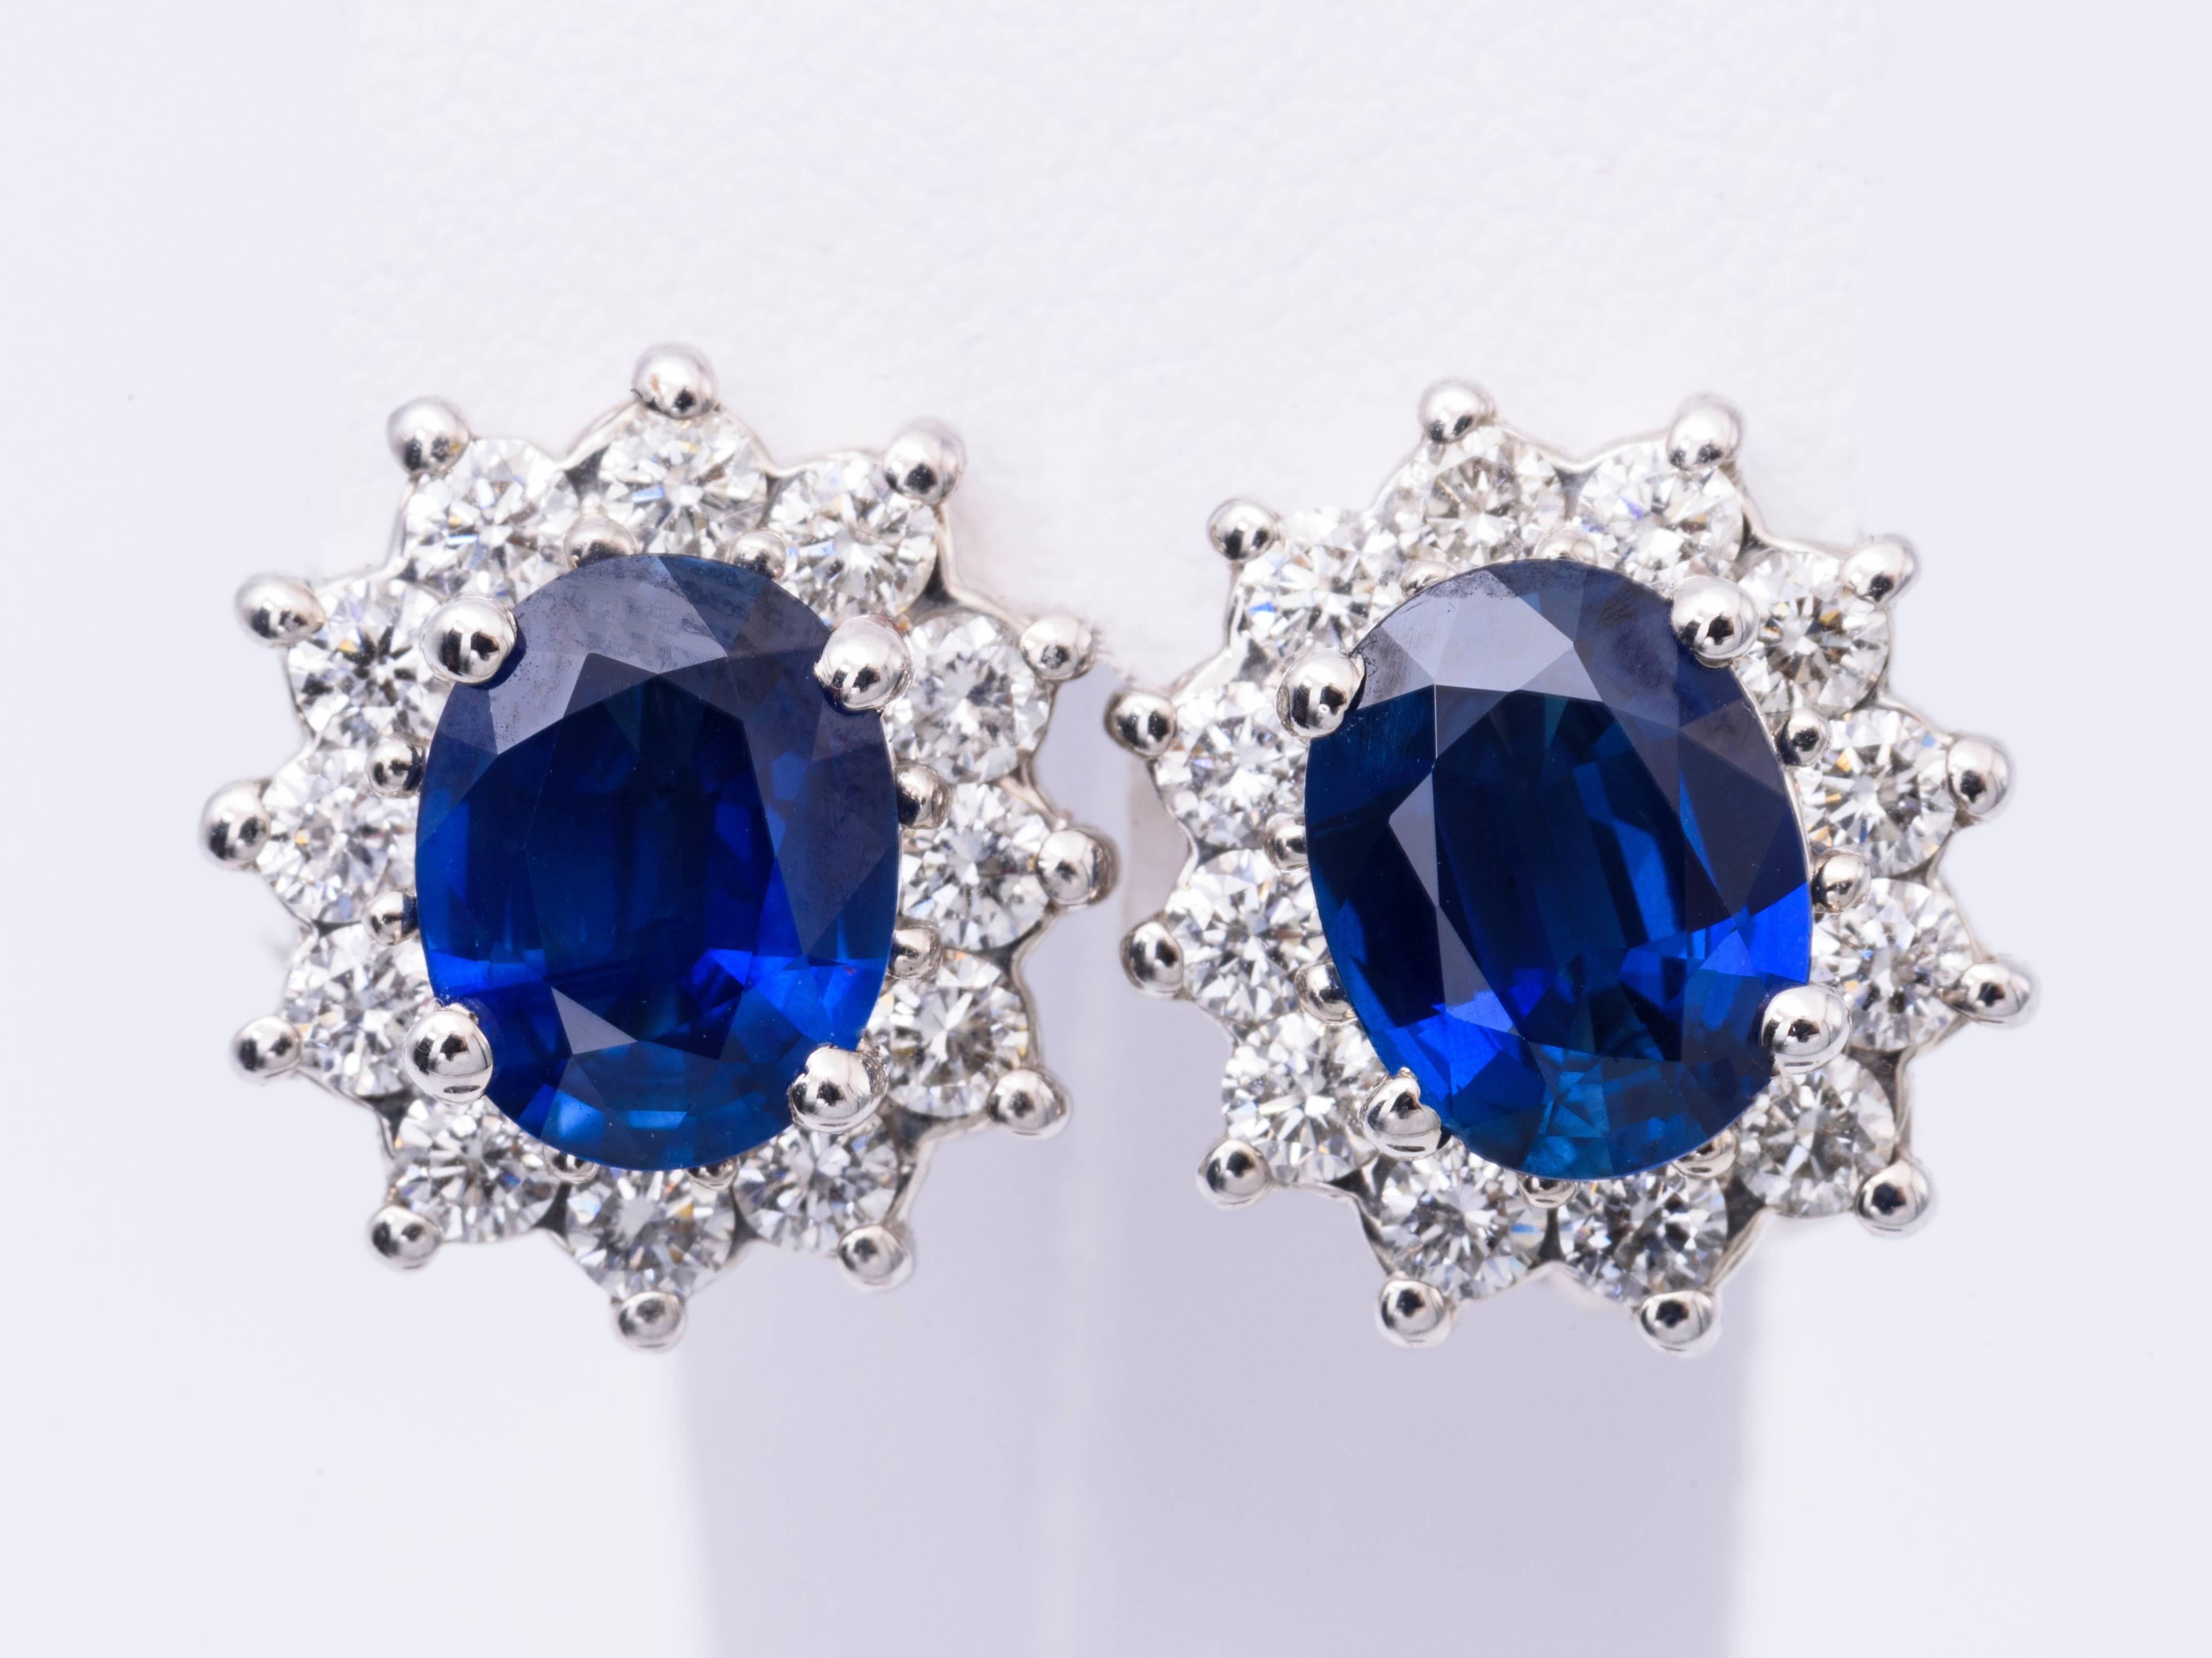 The oval sapphire in these earrings have a total carat weight of 3.40 carats, and they measure 8x6 MM.. The diamonds have a total carat weight of 0.94 carats.
The diamonds are H color and clarity is SI2.
The sapphire is  very bright and nice.
The